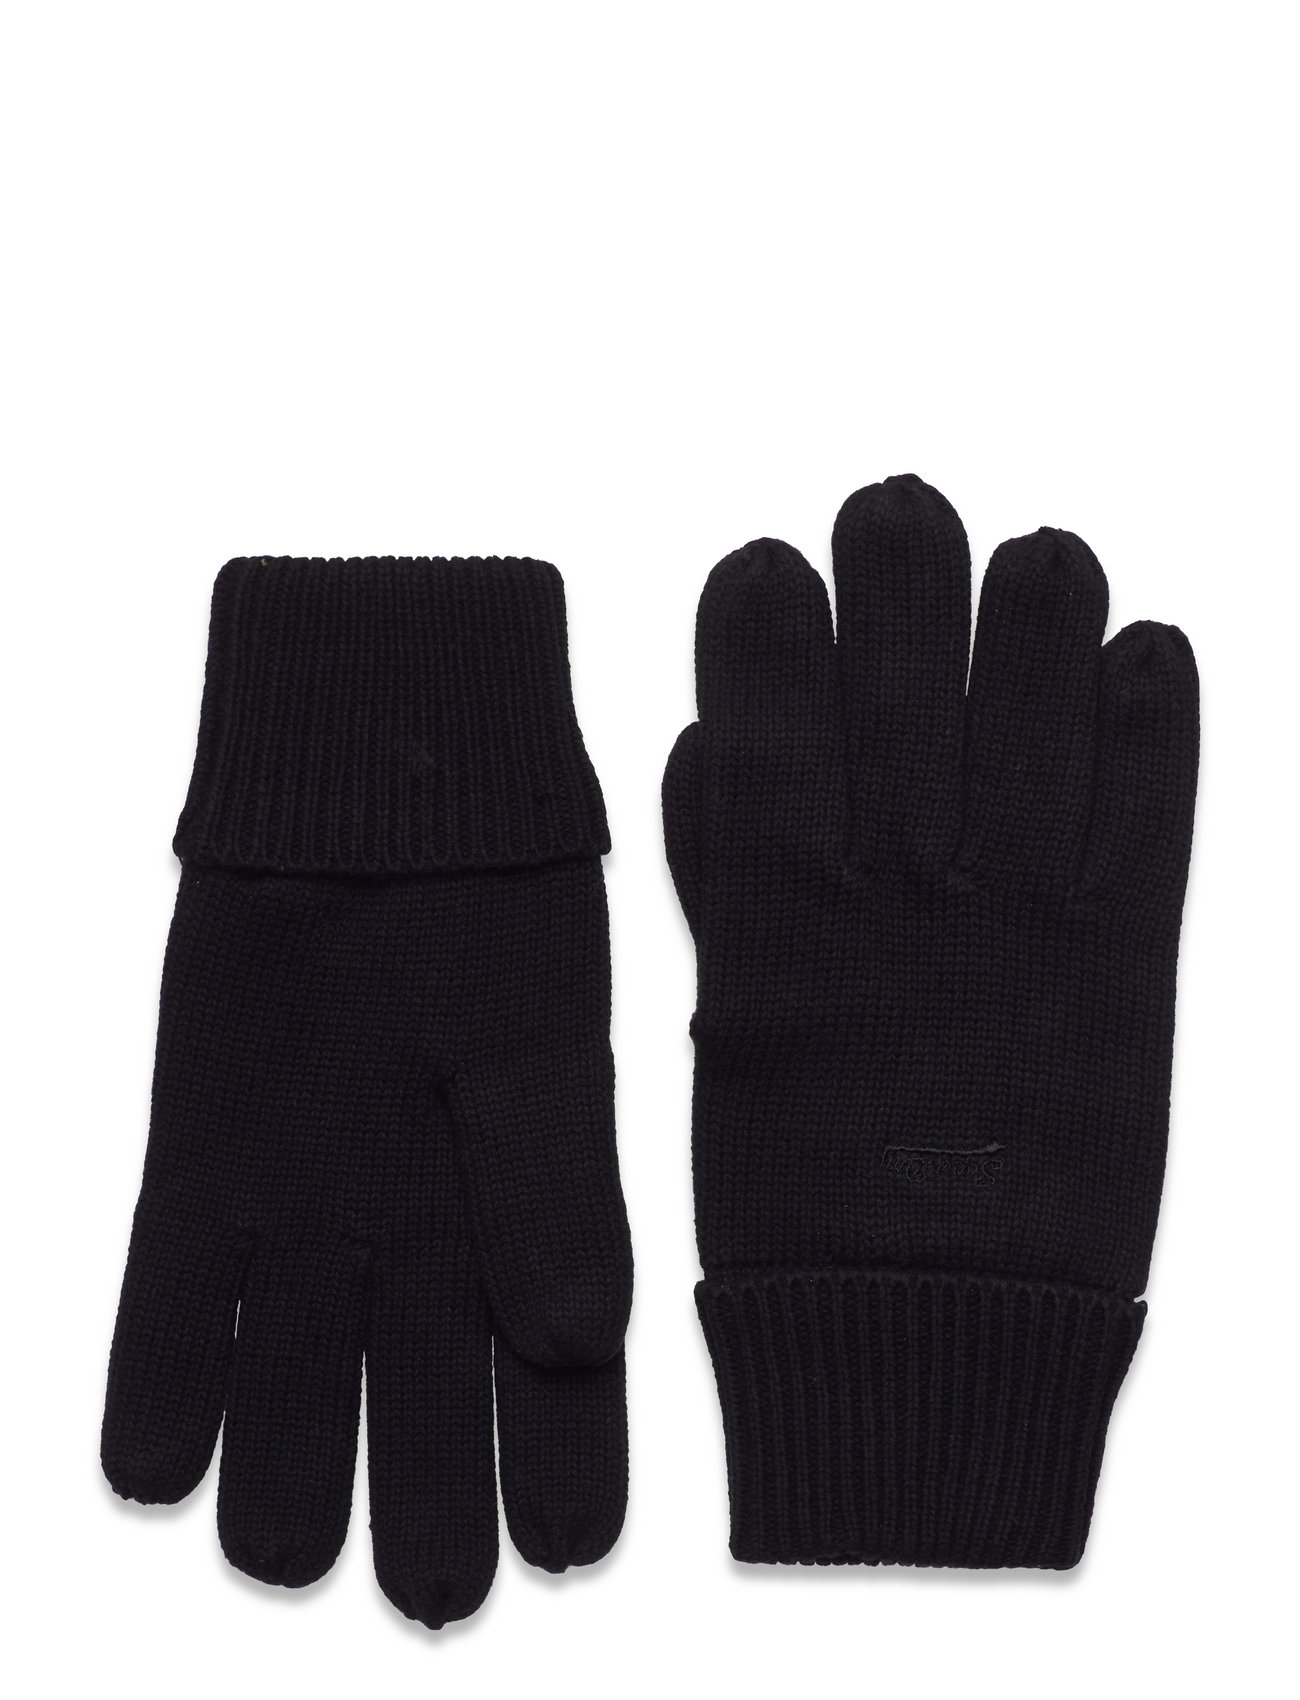 Superdry Knitted Logo Gloves Rich Charcoal Marl - Clothing from